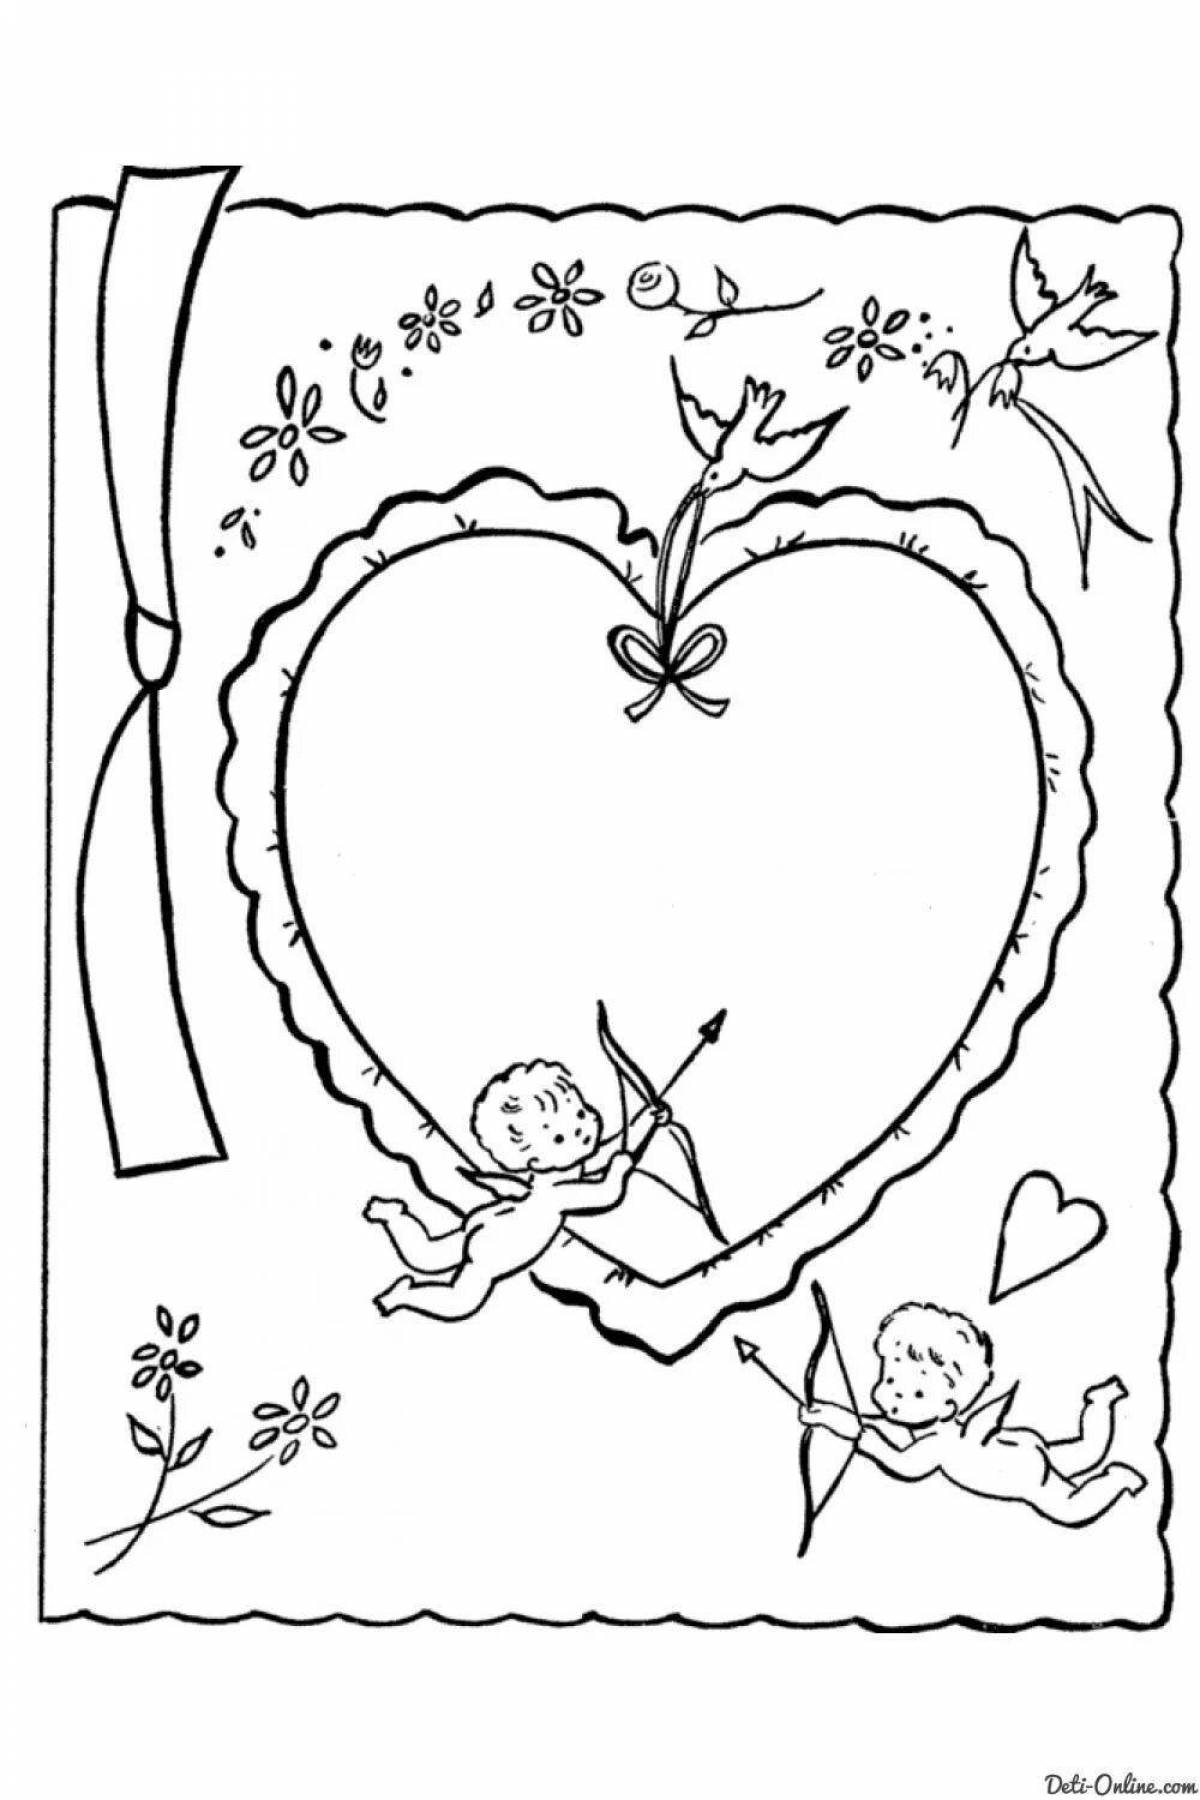 Gorgeous valentine coloring for February 14th